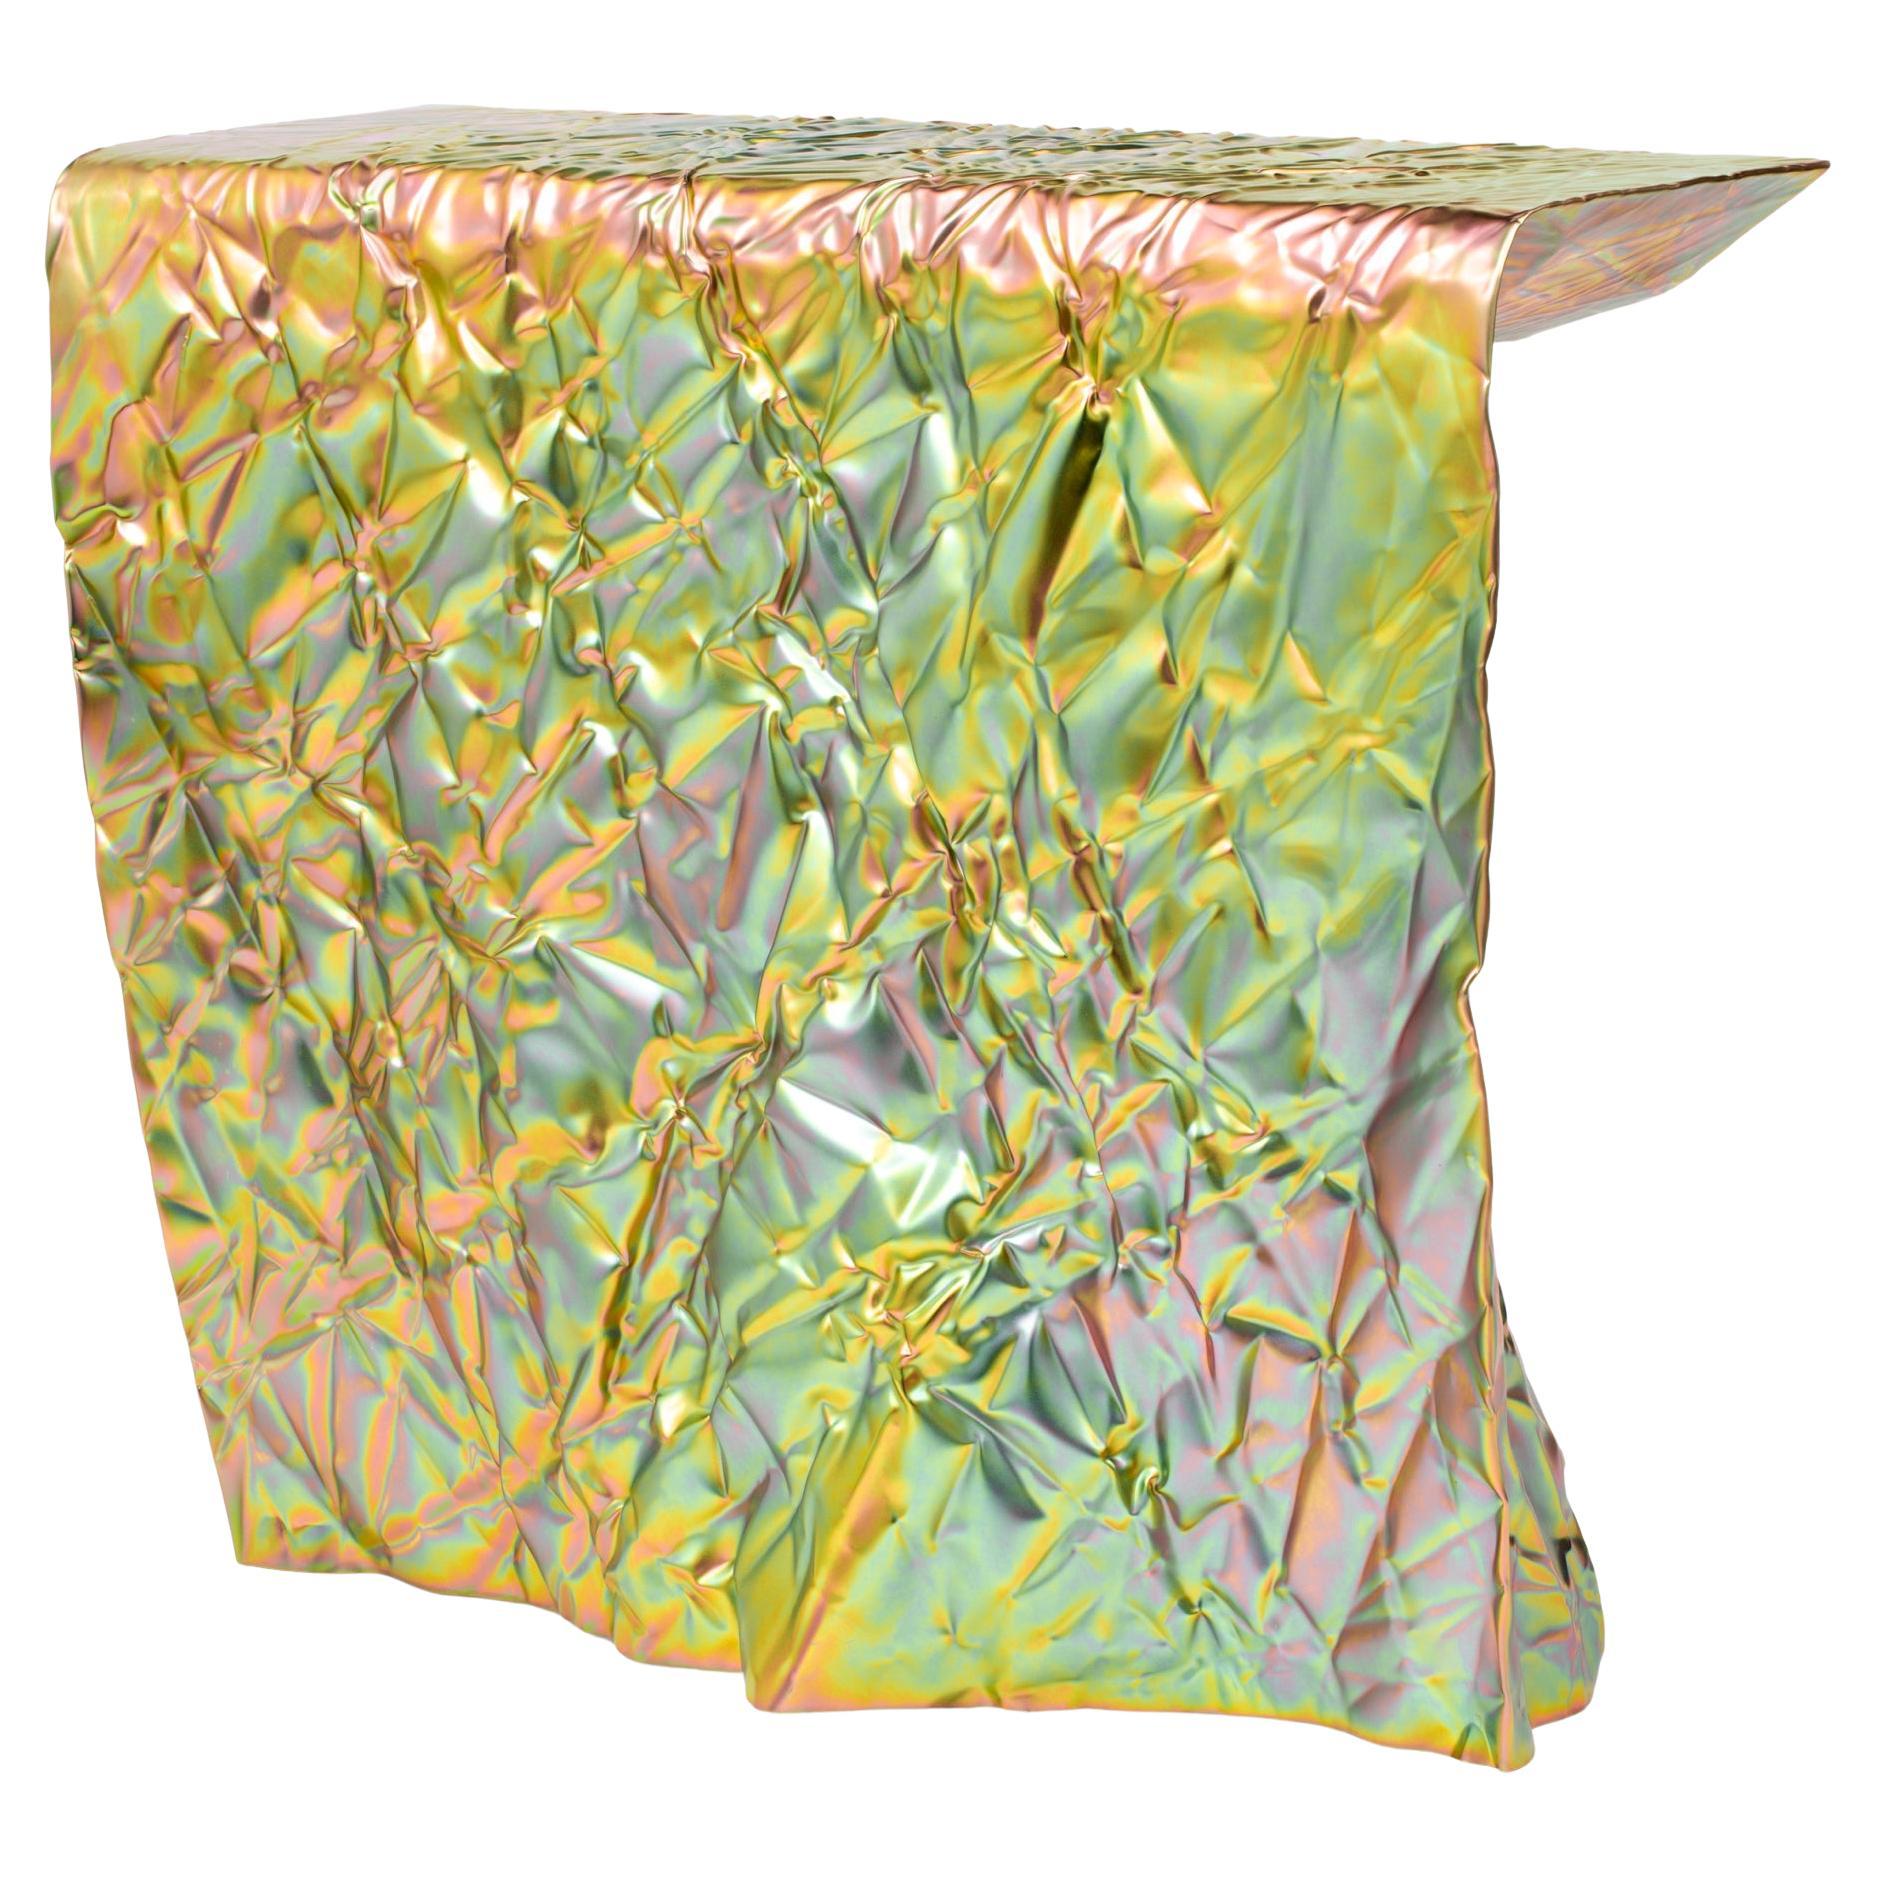 Christopher Prinz "Wrinkled Console" in Yellow Iridescent 'Raw' For Sale